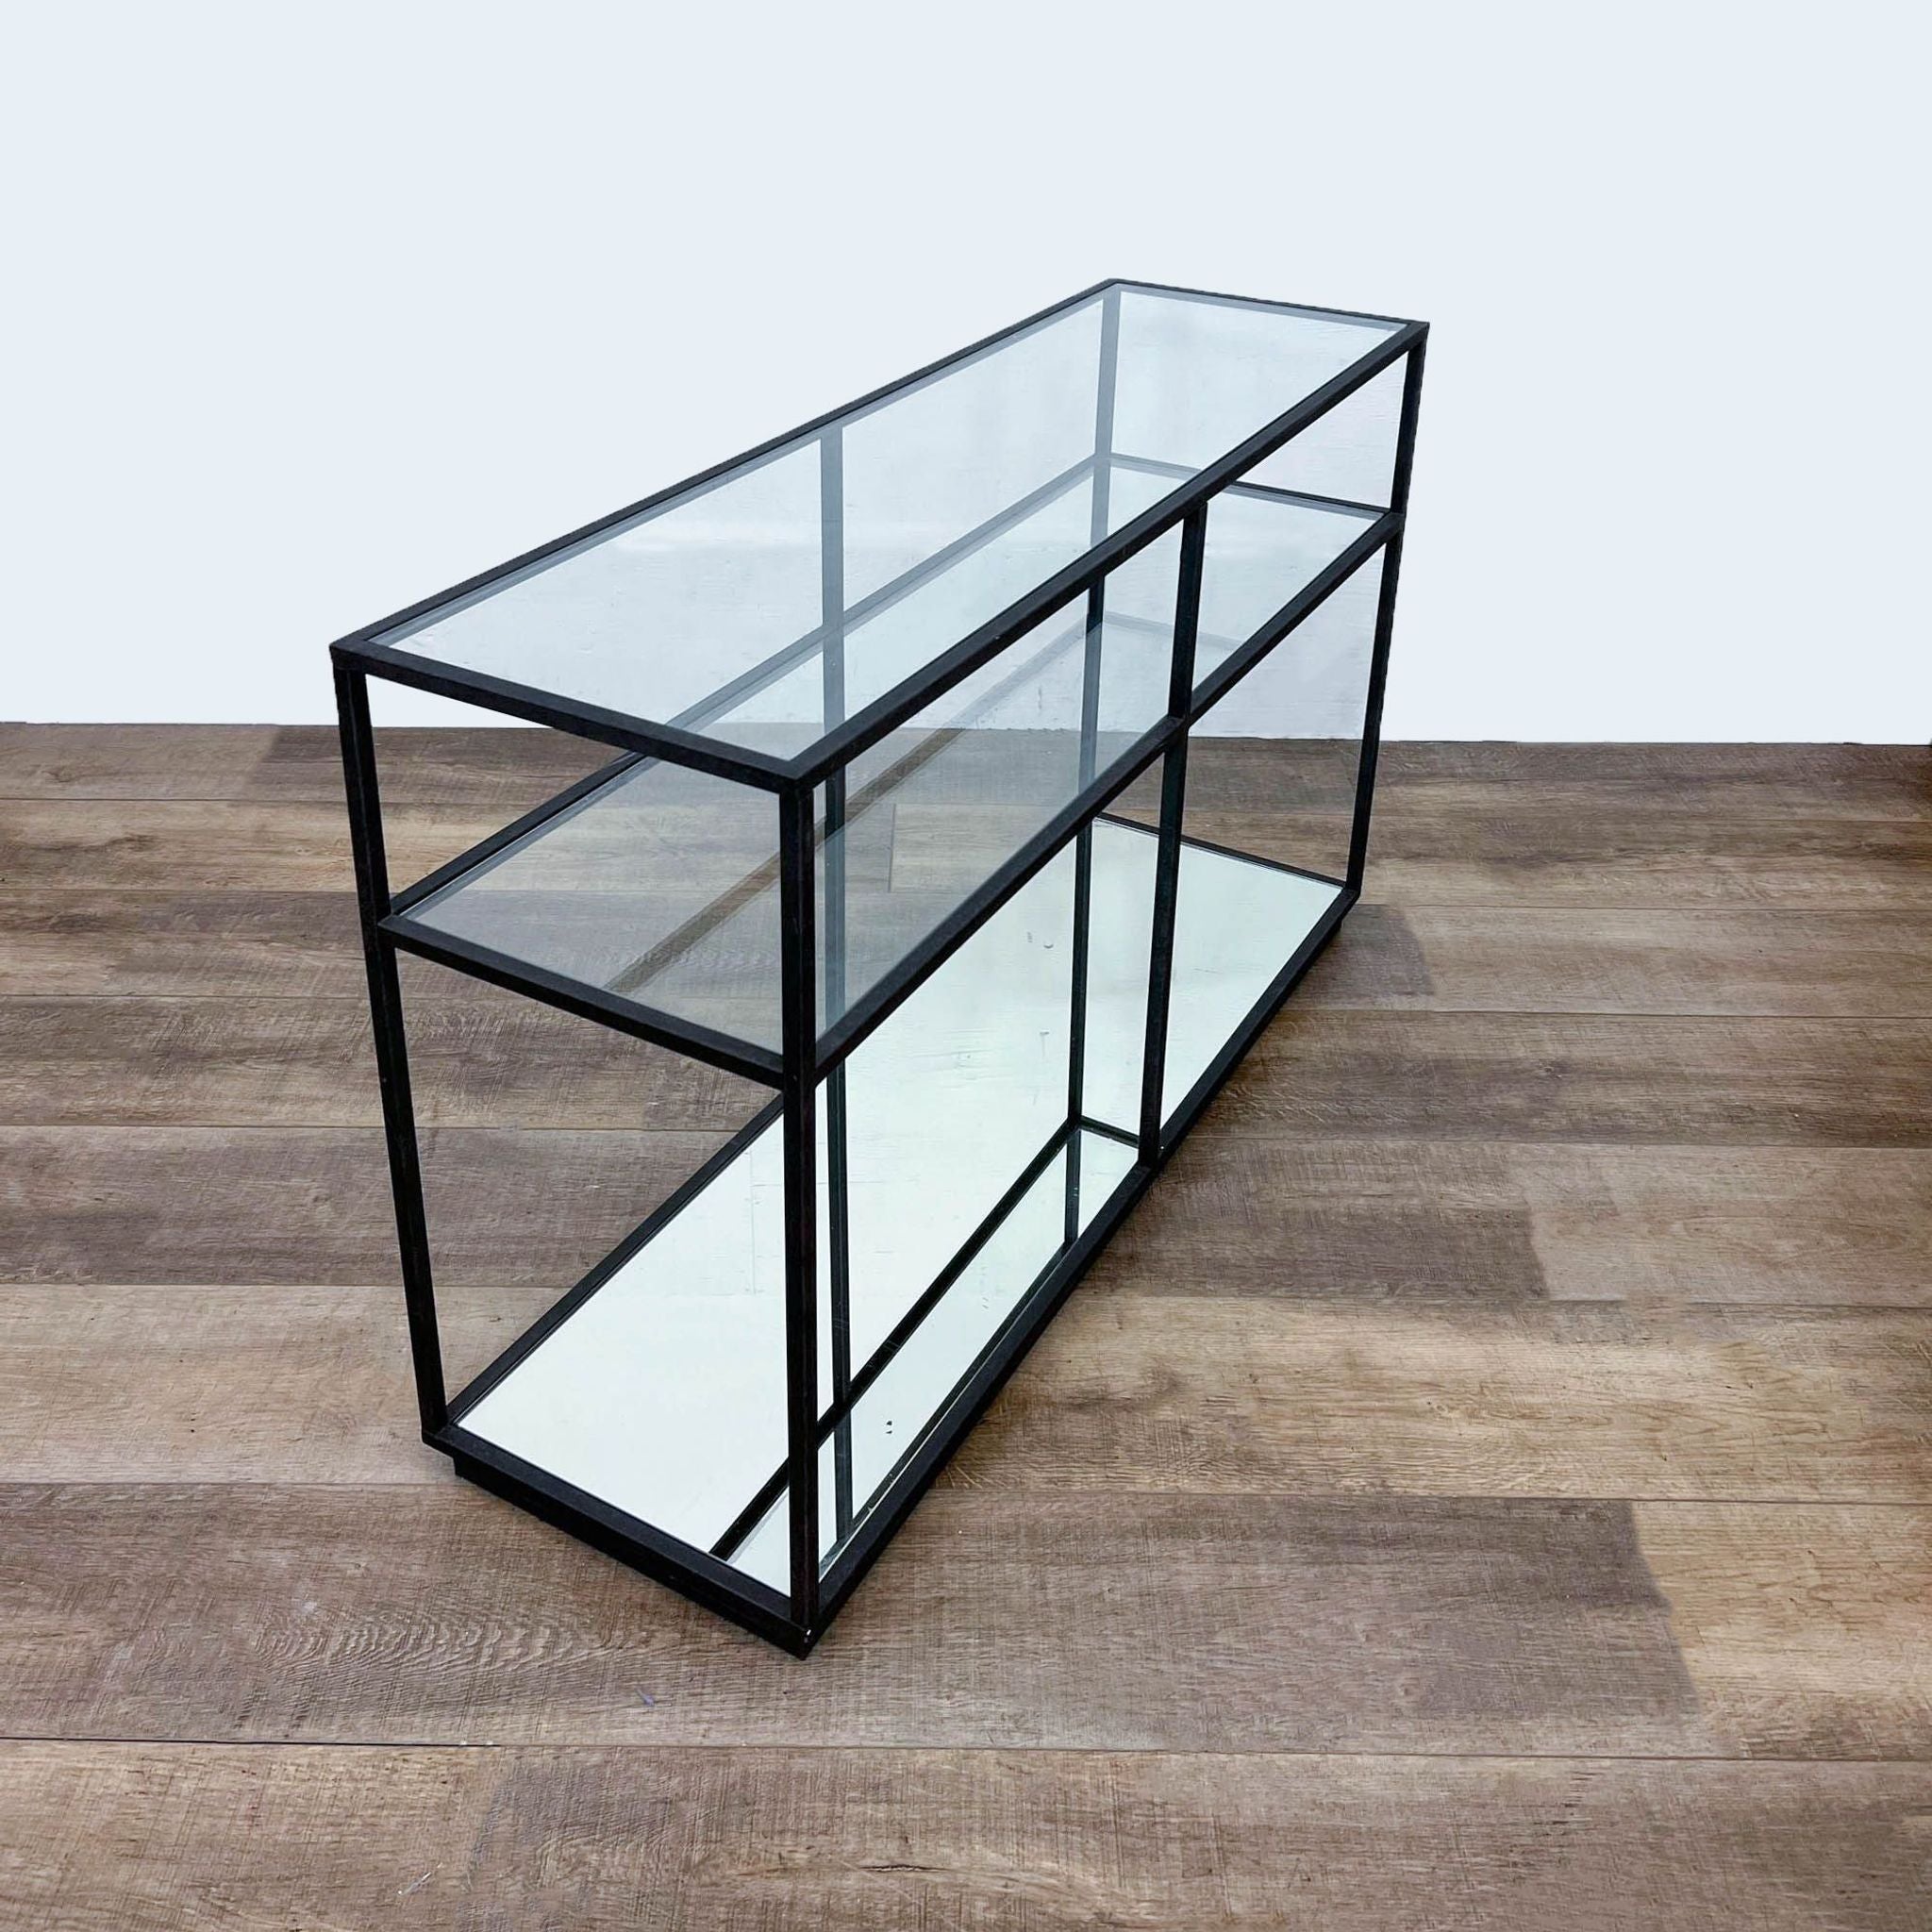 Elegant side table by Reperch with black metal structure and mirrored bottom shelf, angled view.